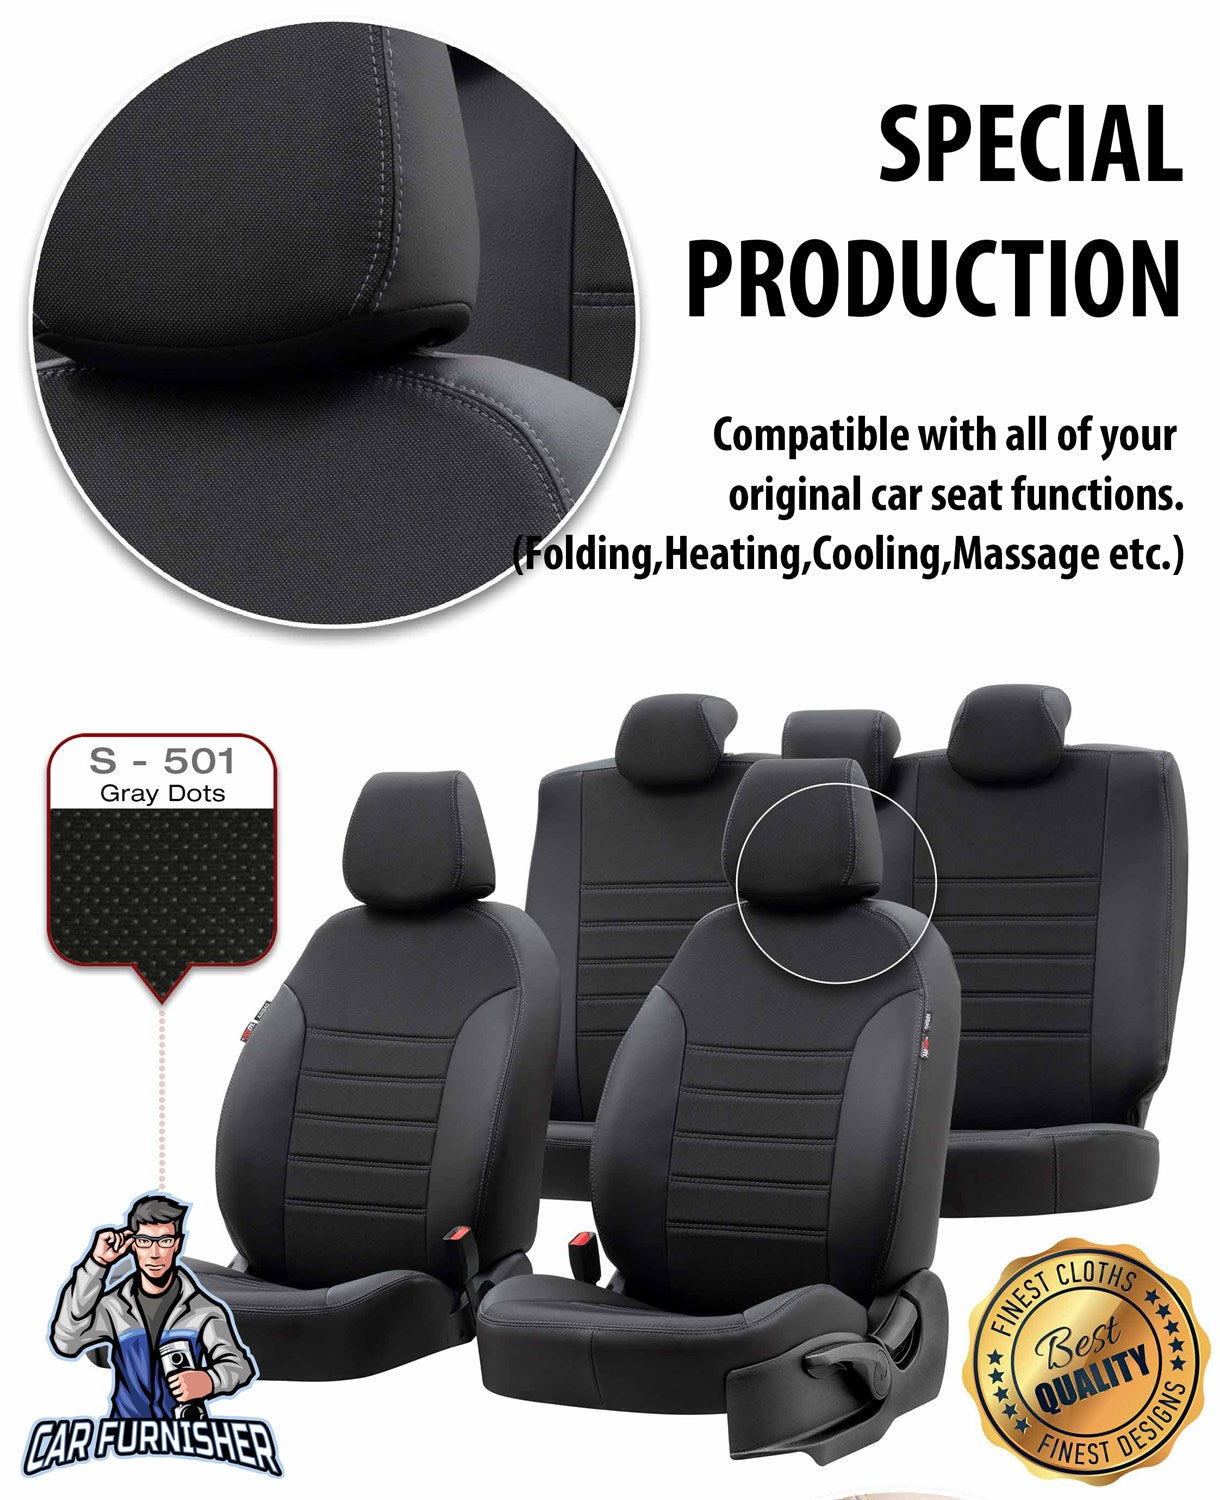 Jeep Renegade Seat Covers Paris Leather & Jacquard Design Red Leather & Jacquard Fabric